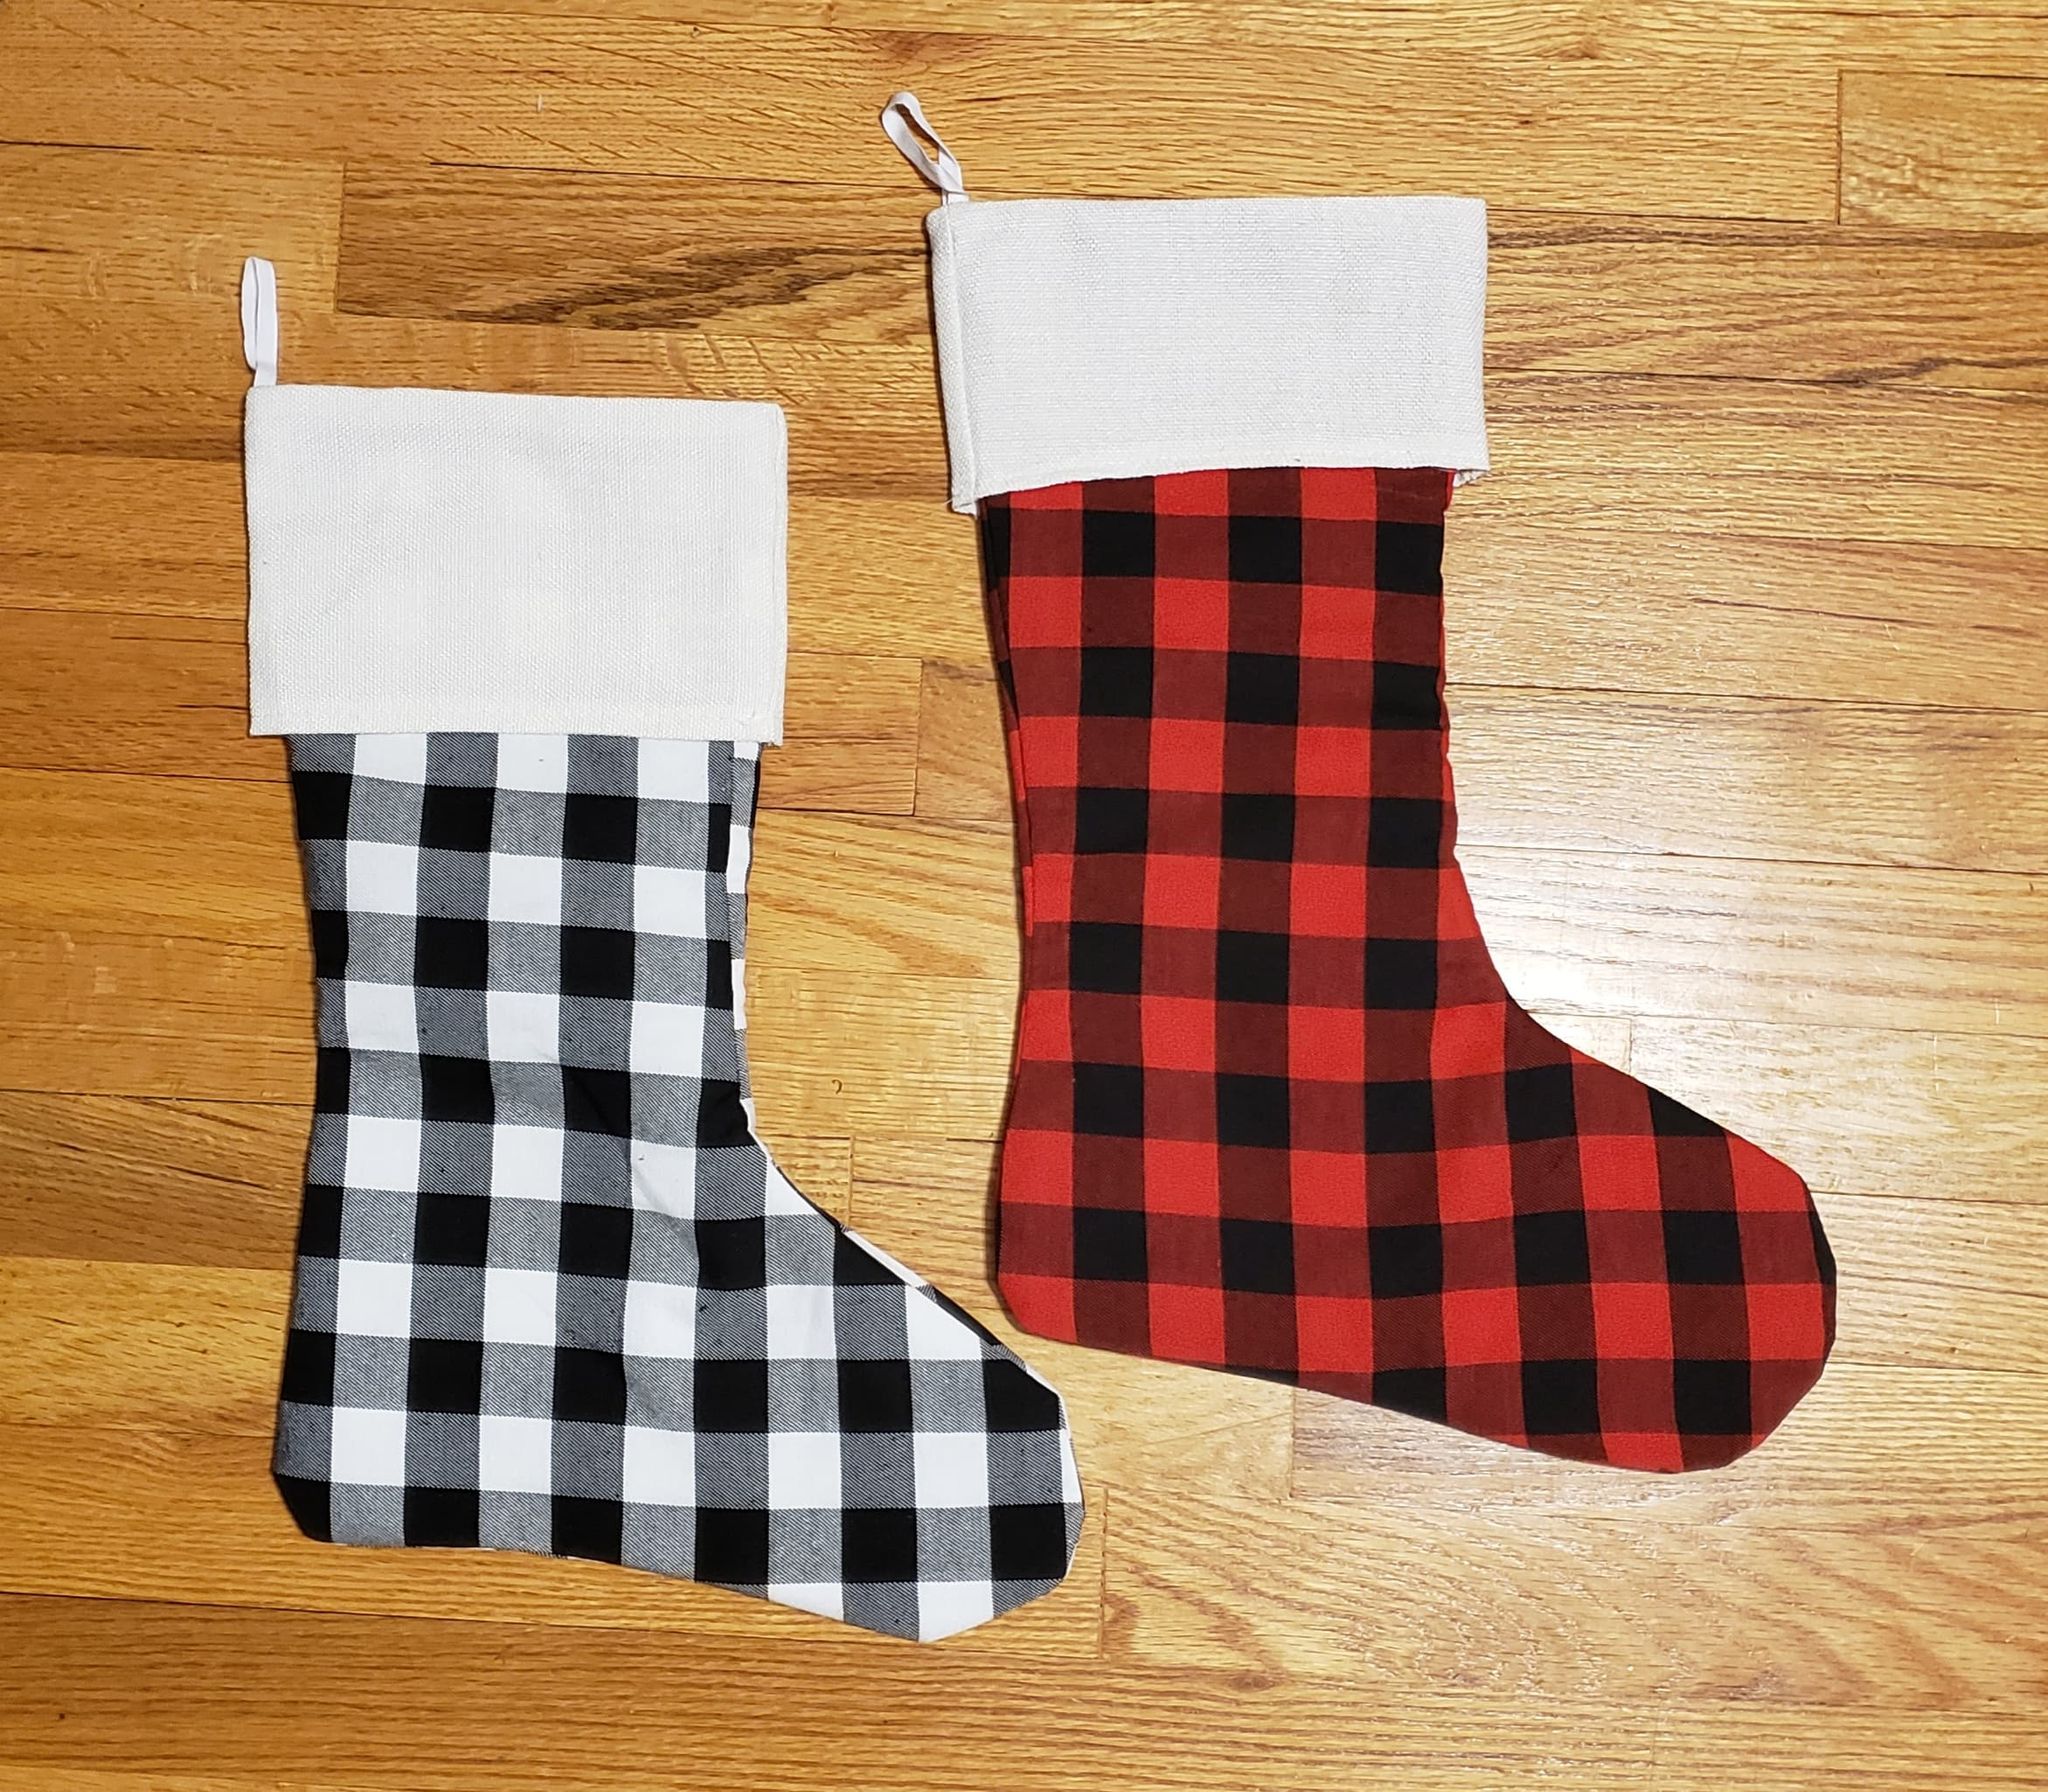 Plaid Stockings , they are great for Sublimation !!! ( Single or bulk buy )